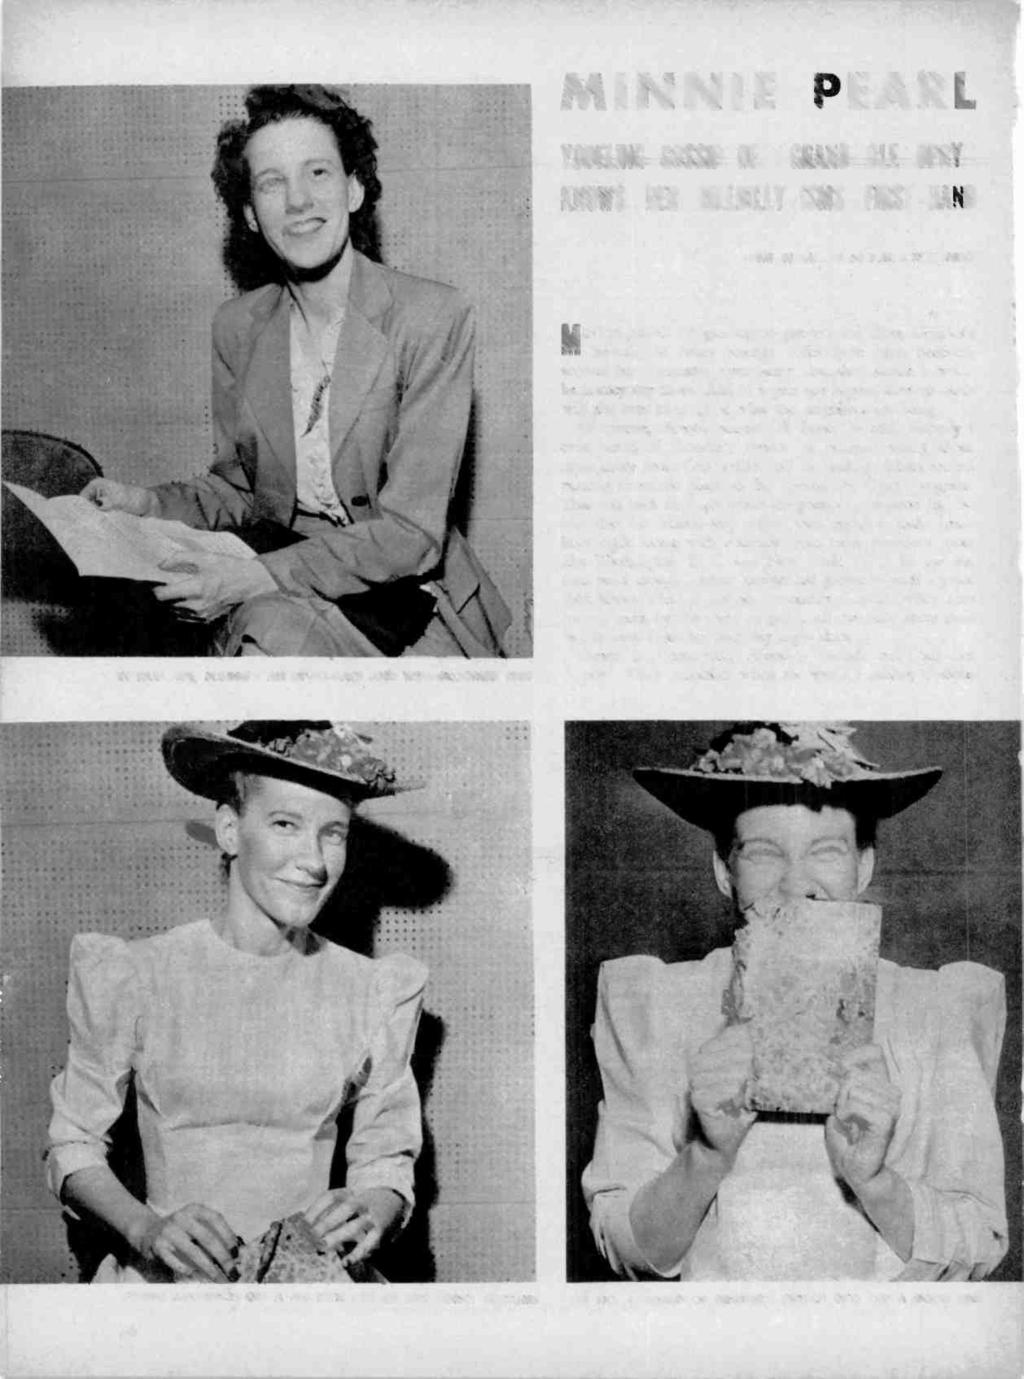 a* MINNIE PEARL 1" +'G4 YODELING GOSSIP OF "GRAND OLE OPRY" KNOWS HER HILLBILLY - ISMS FIRST- HARD TUNE IN SAT 10:30 PM EWT (NEC) -- ' IN REAL LIFE, MINNIE'S AN UP-TO-DATE AND WELL-GROOMED MISS